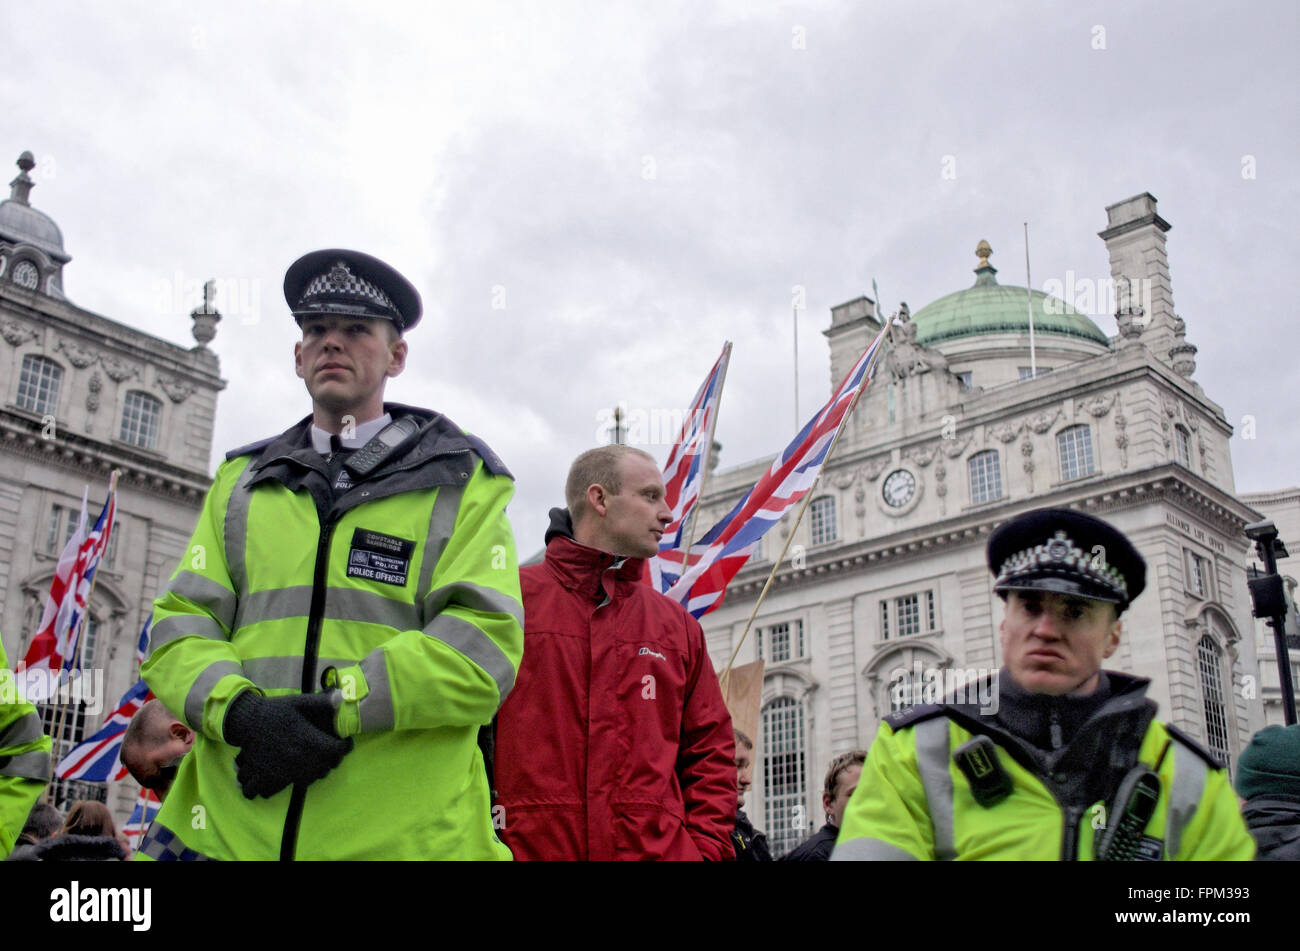 London, UK. Saturday 19th March 2016. Police protect a Britain First member from antifascist protesters. Stock Photo